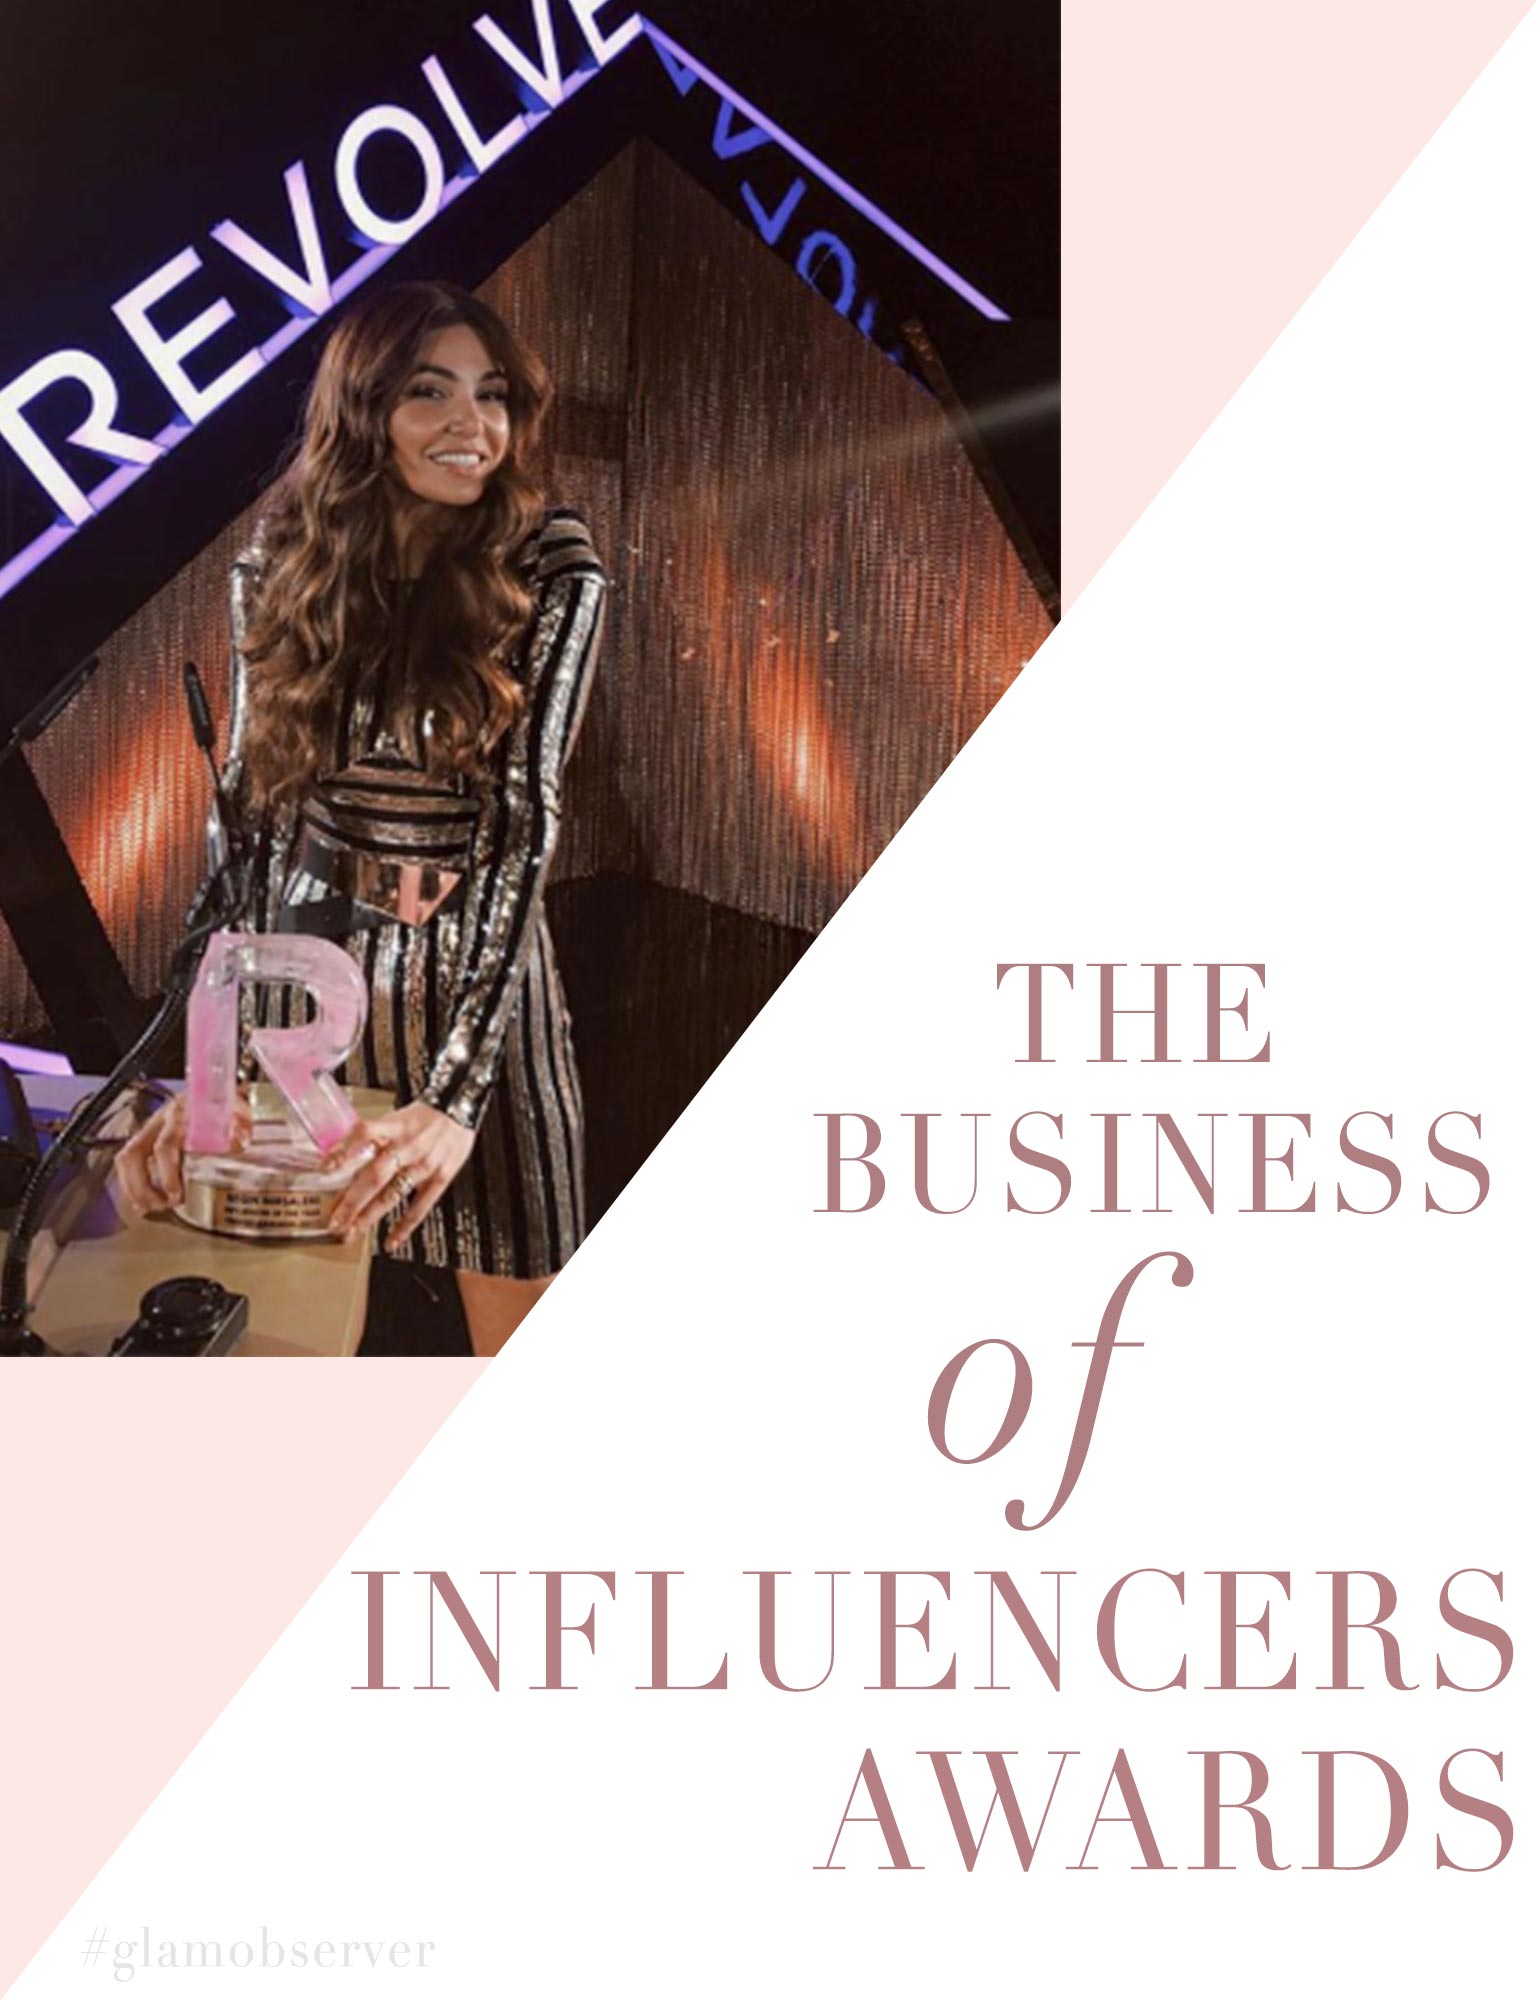 The Business of influencers awards